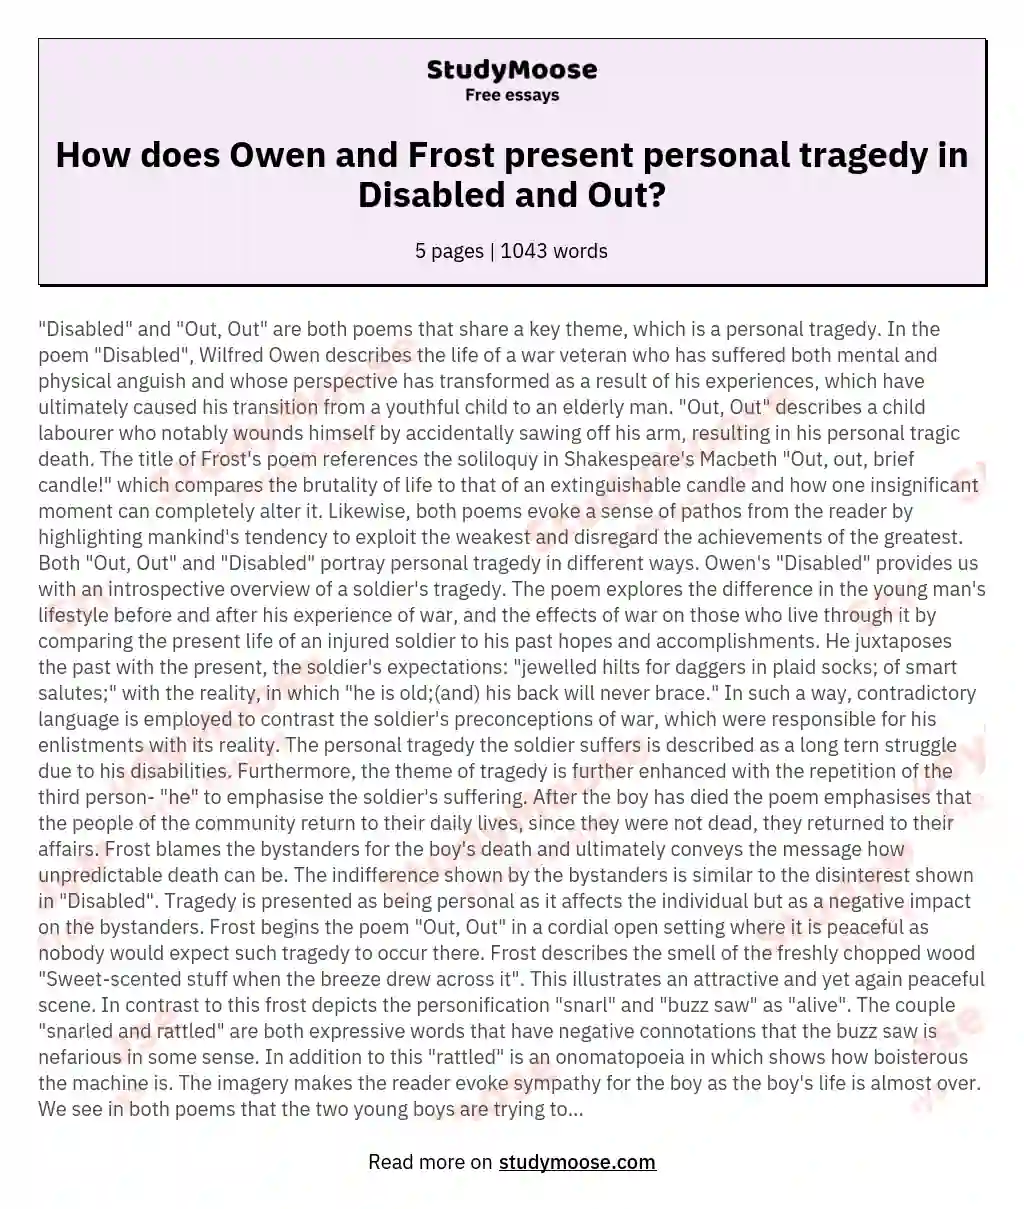 How does Owen and Frost present personal tragedy in Disabled and Out? essay